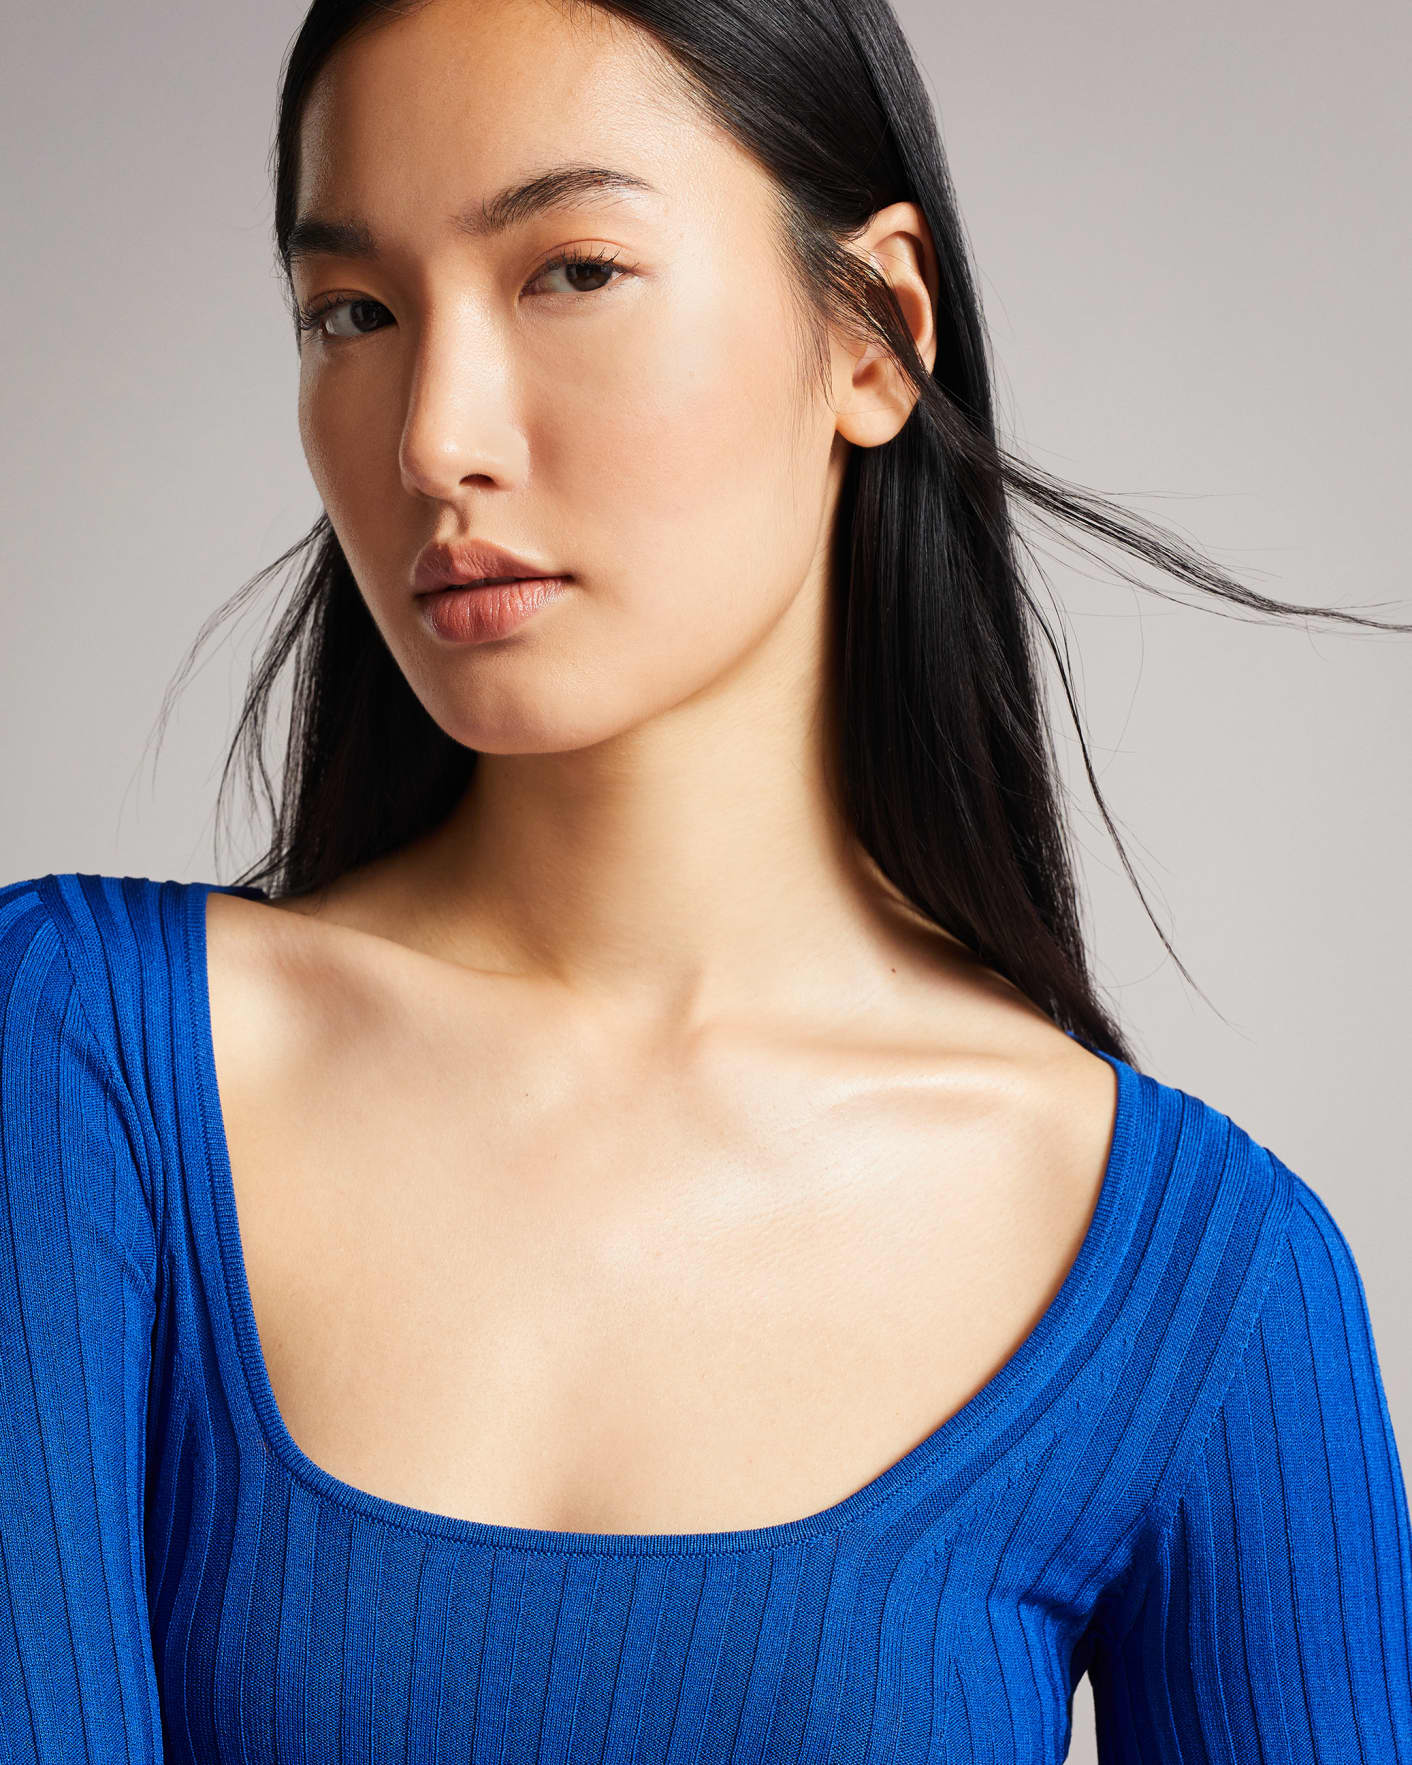 Bright Blue Open Back Detailed Knit Top Ted Baker